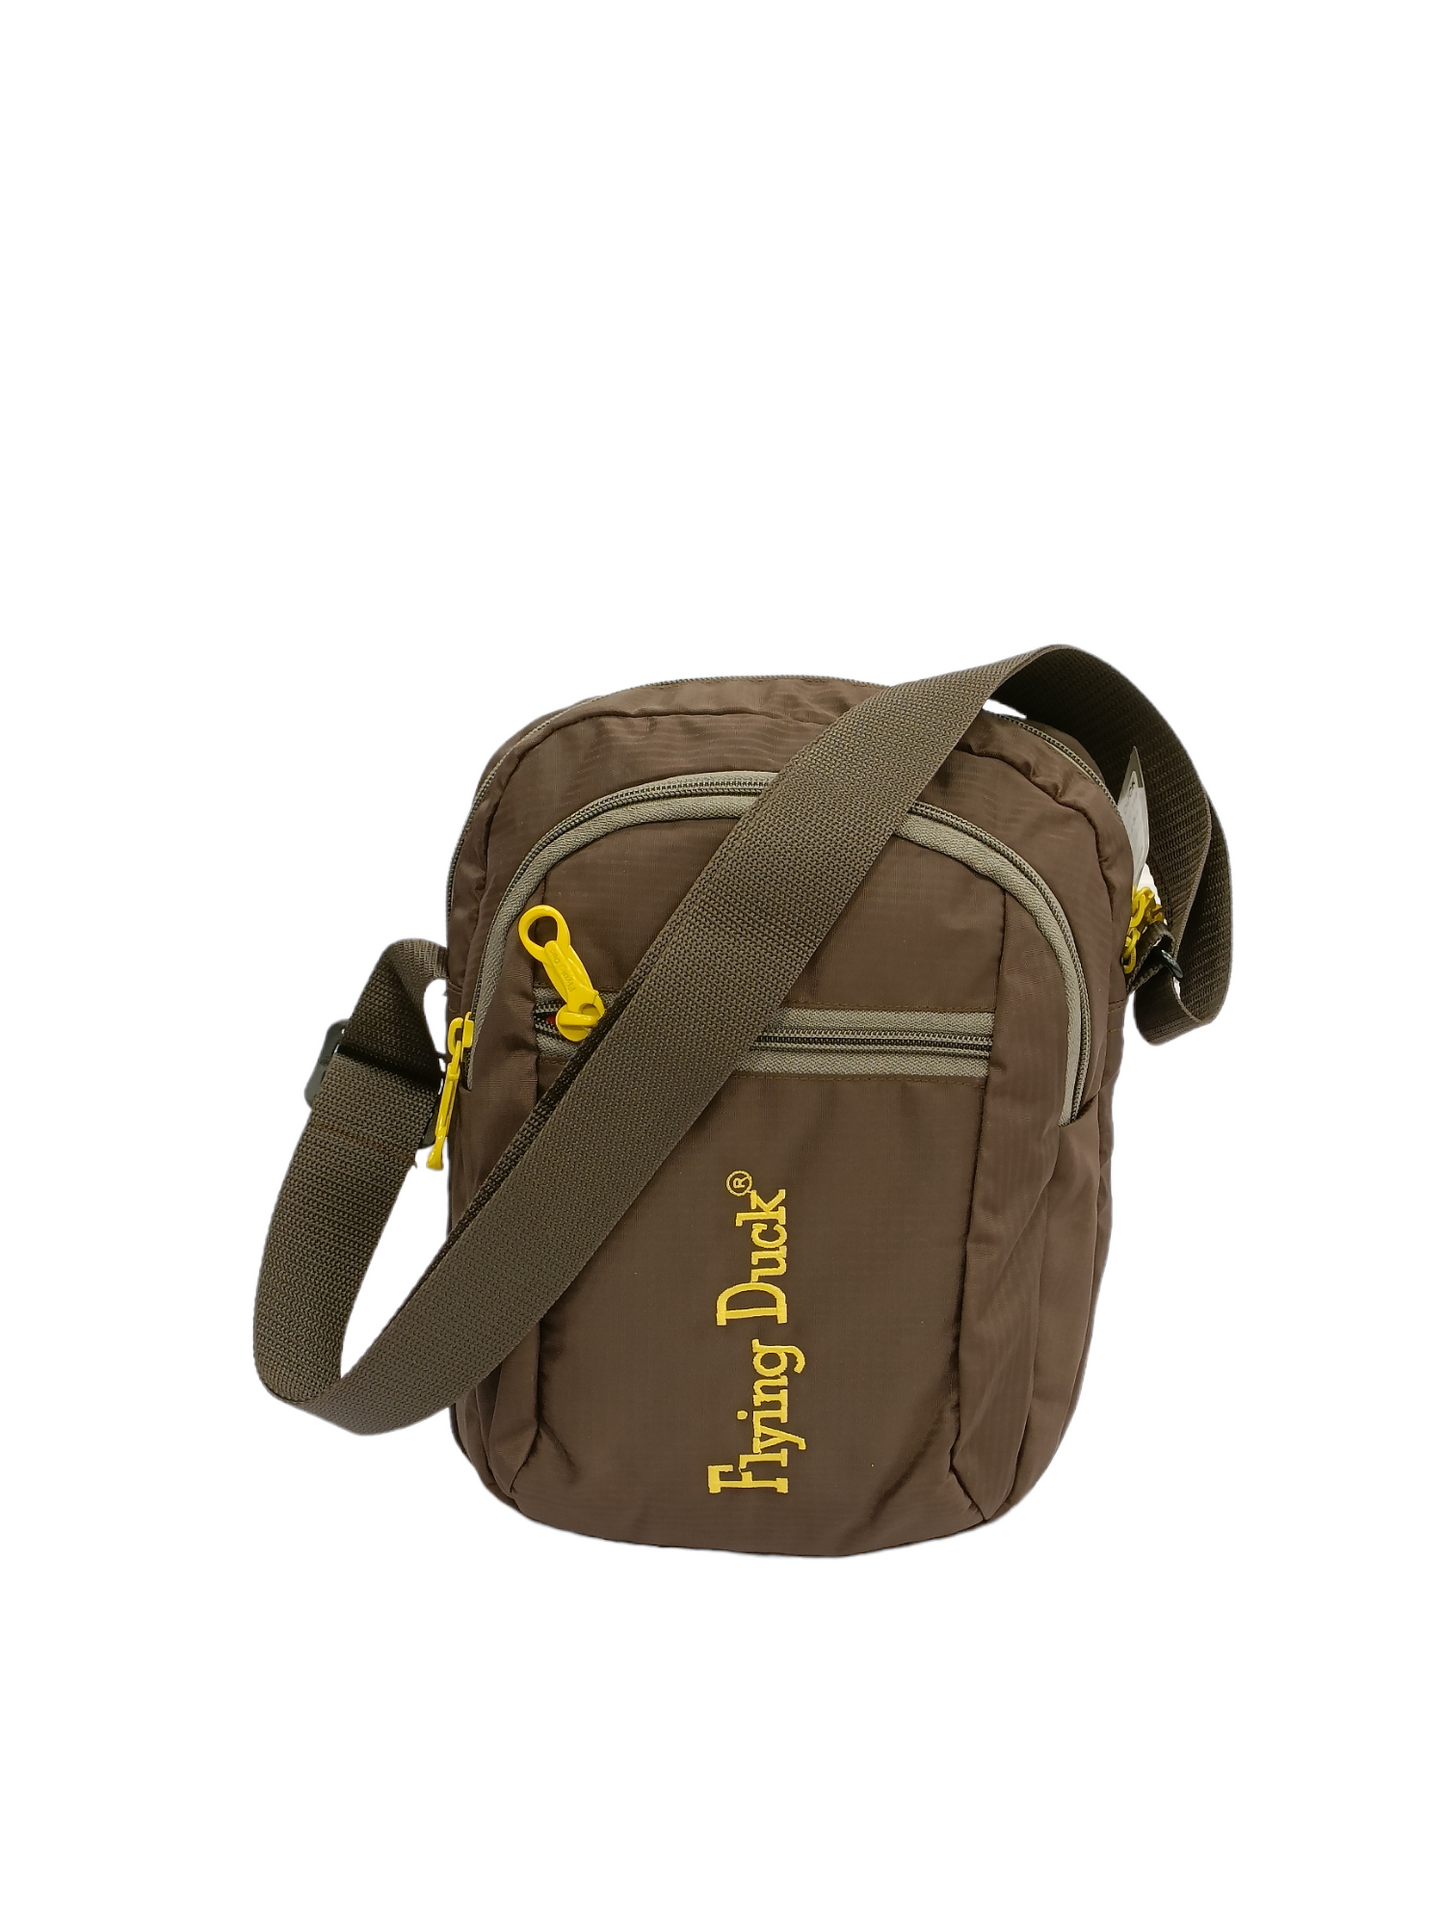 Flying duck medium size side bag brown colour